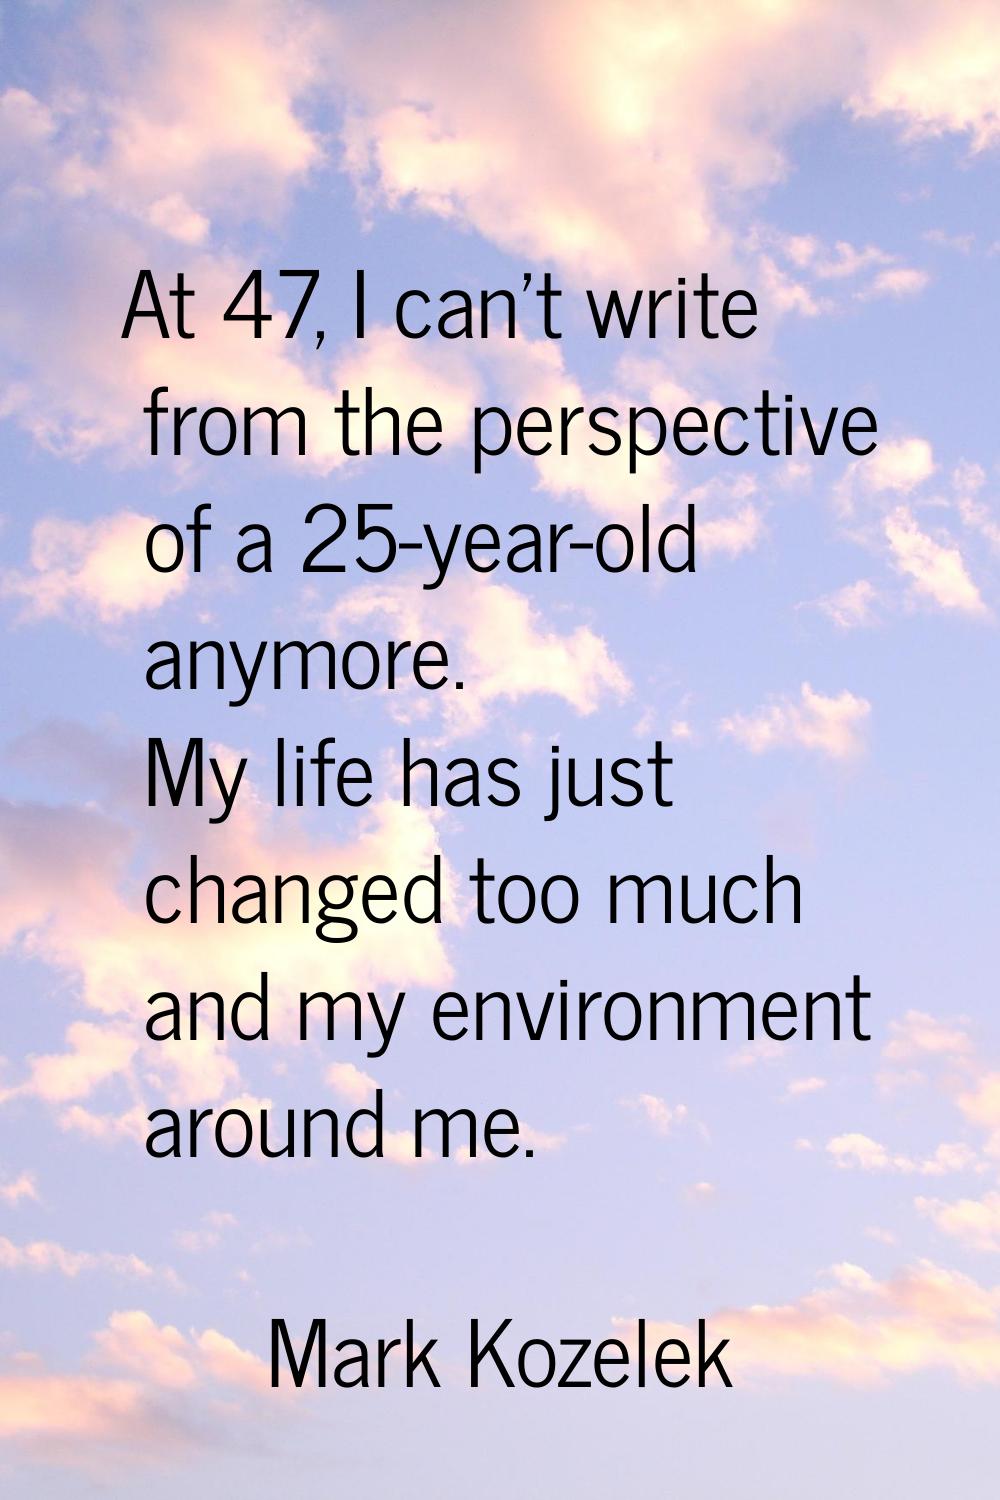 At 47, I can't write from the perspective of a 25-year-old anymore. My life has just changed too mu